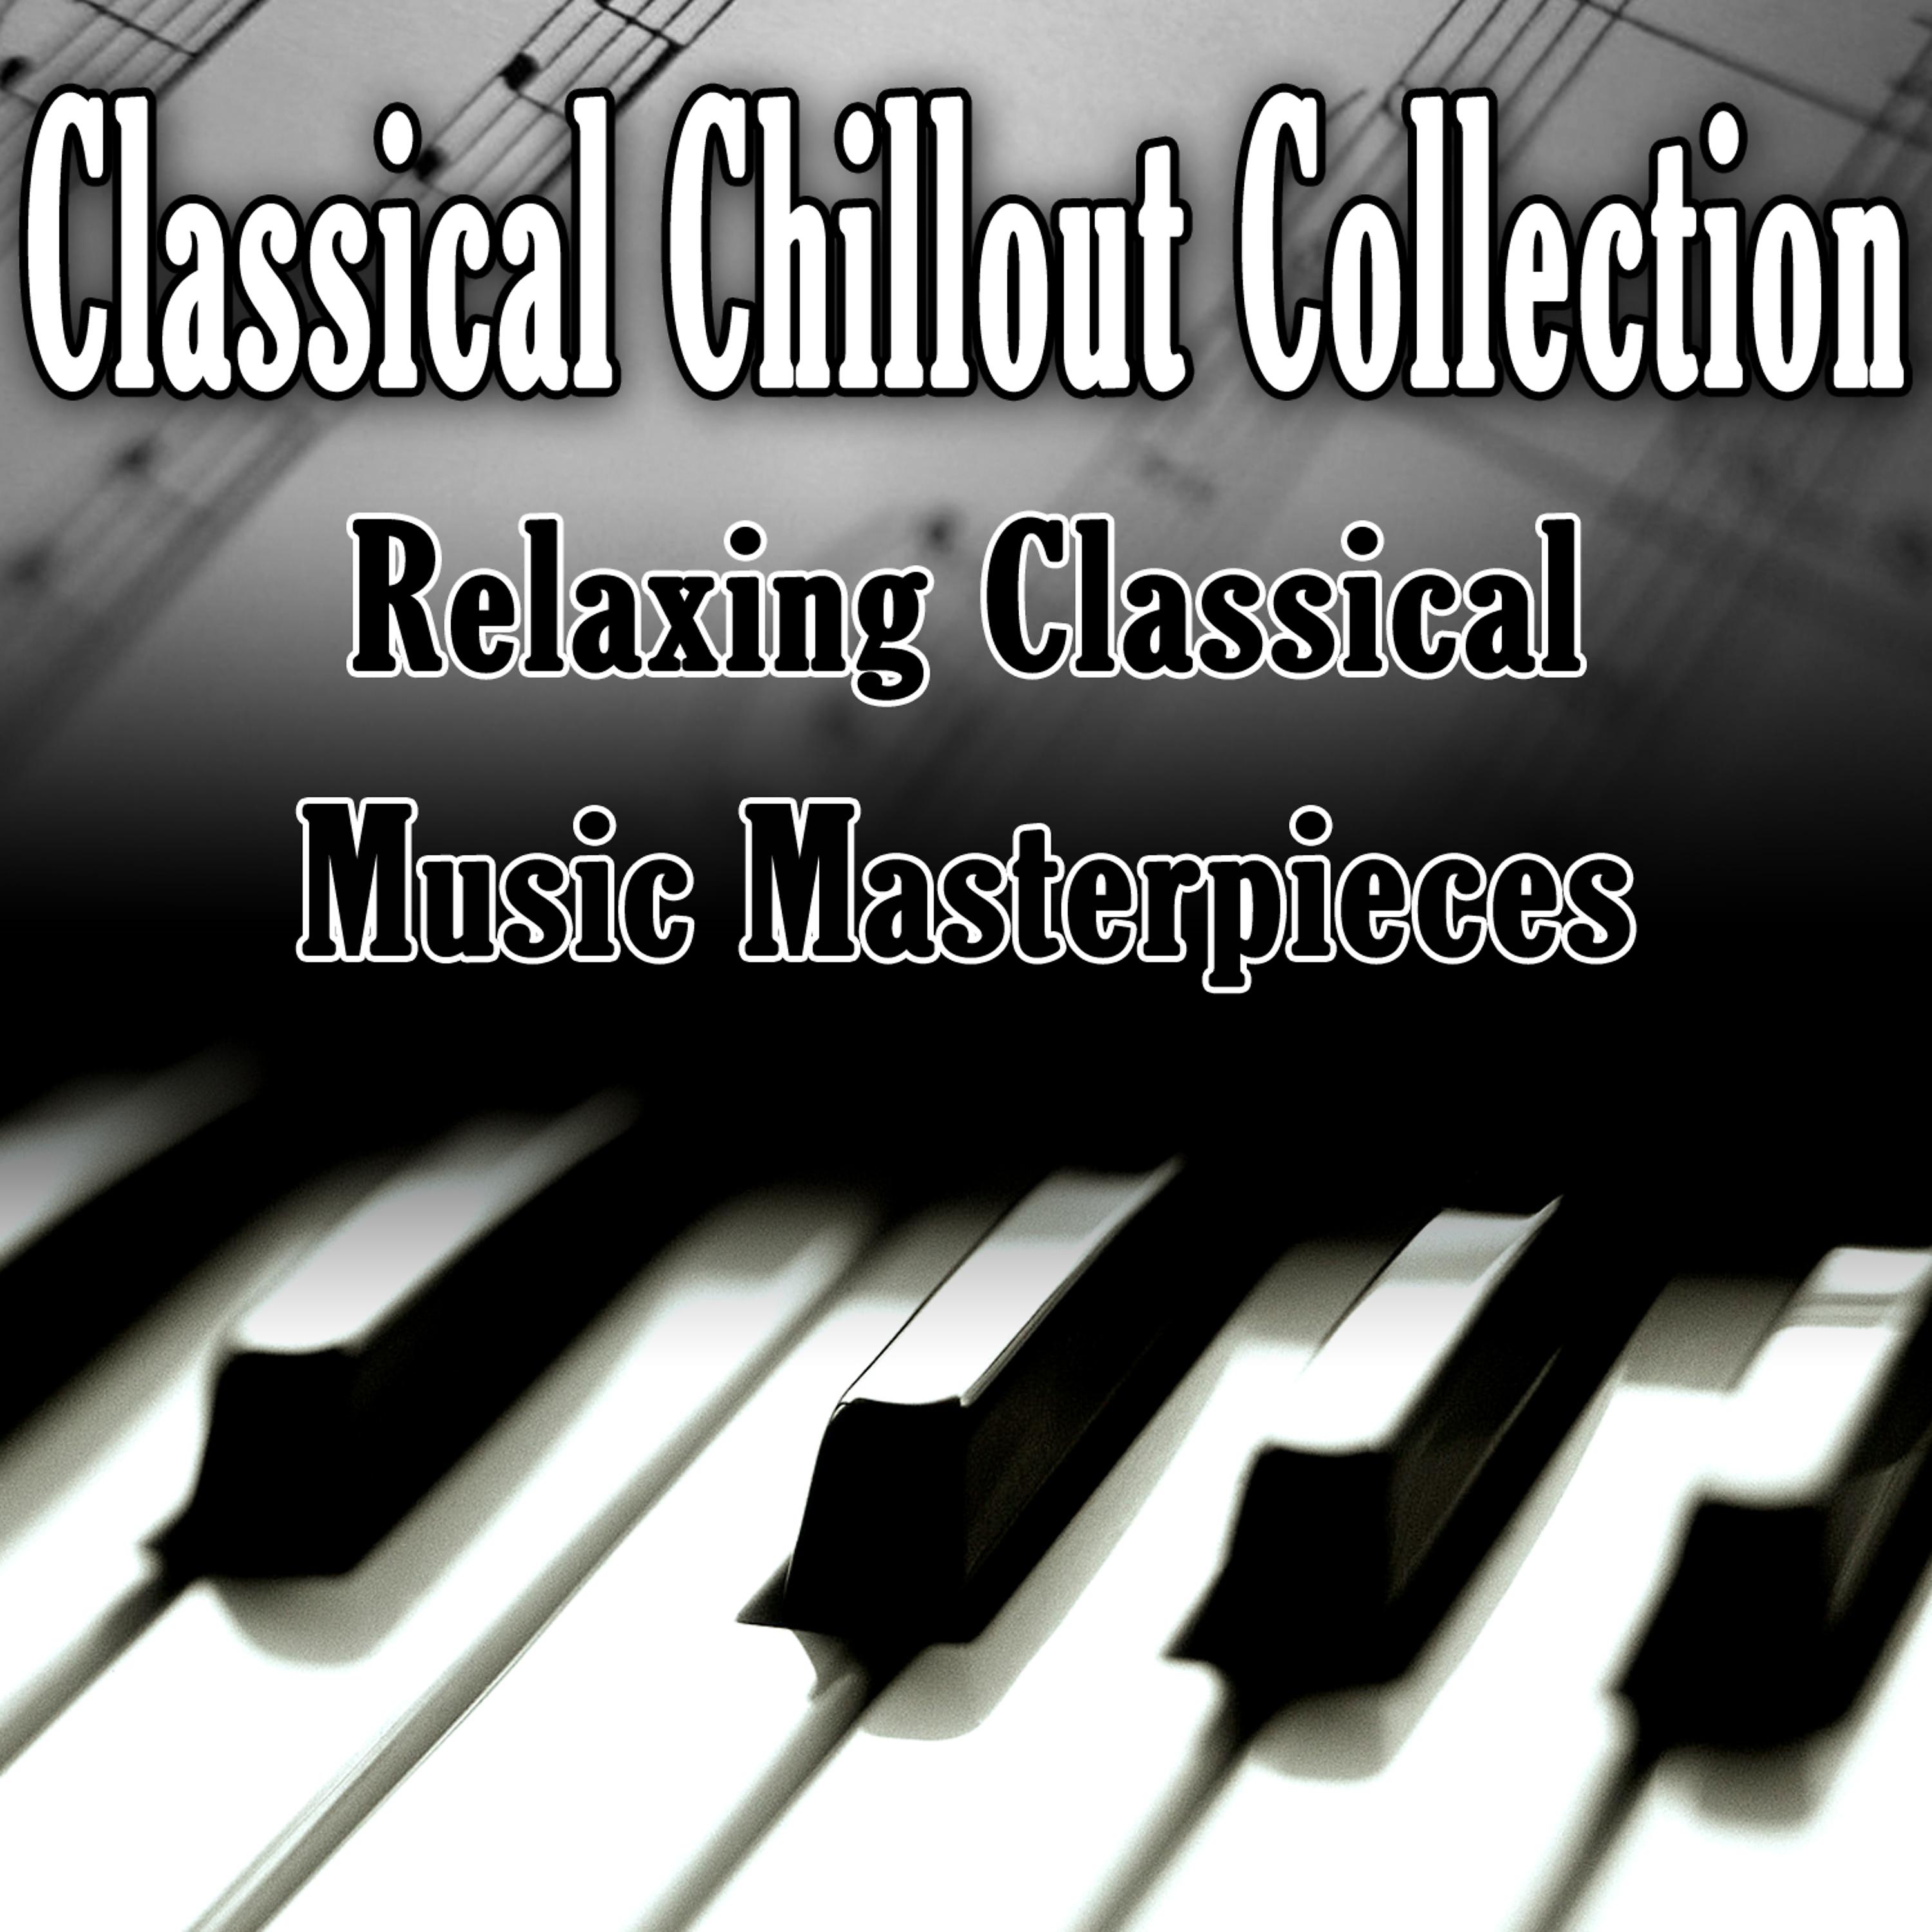 Постер альбома Classical Chillout Collection - Relaxing Classical Music Masterpieces